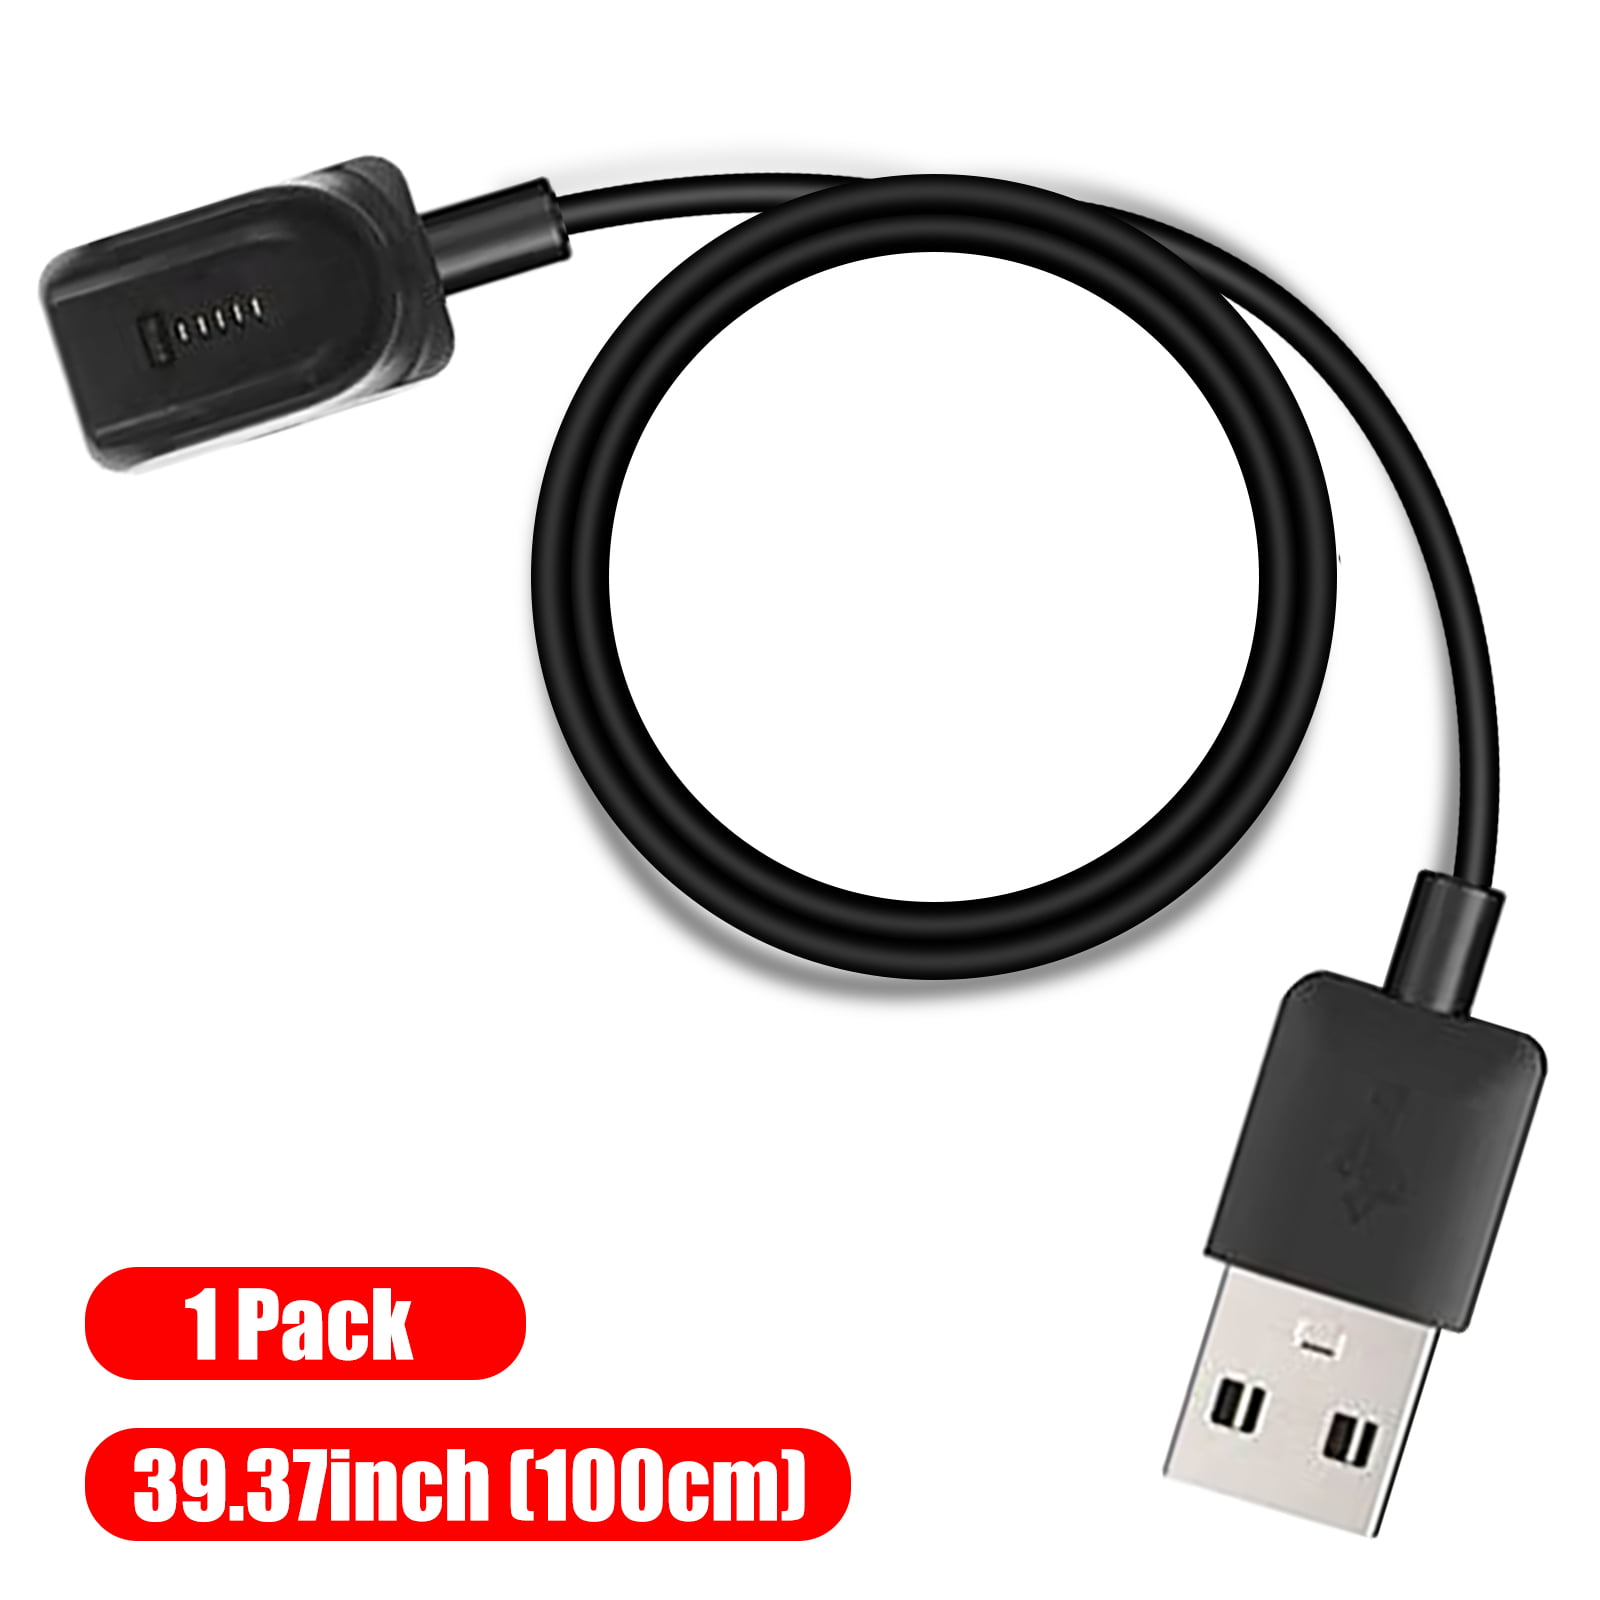 Black/30cm/12 Short 1ft MicroUSB Cable for Plantronics Voyager 5220 UC P/N 206110-101 High Speed Charging. 